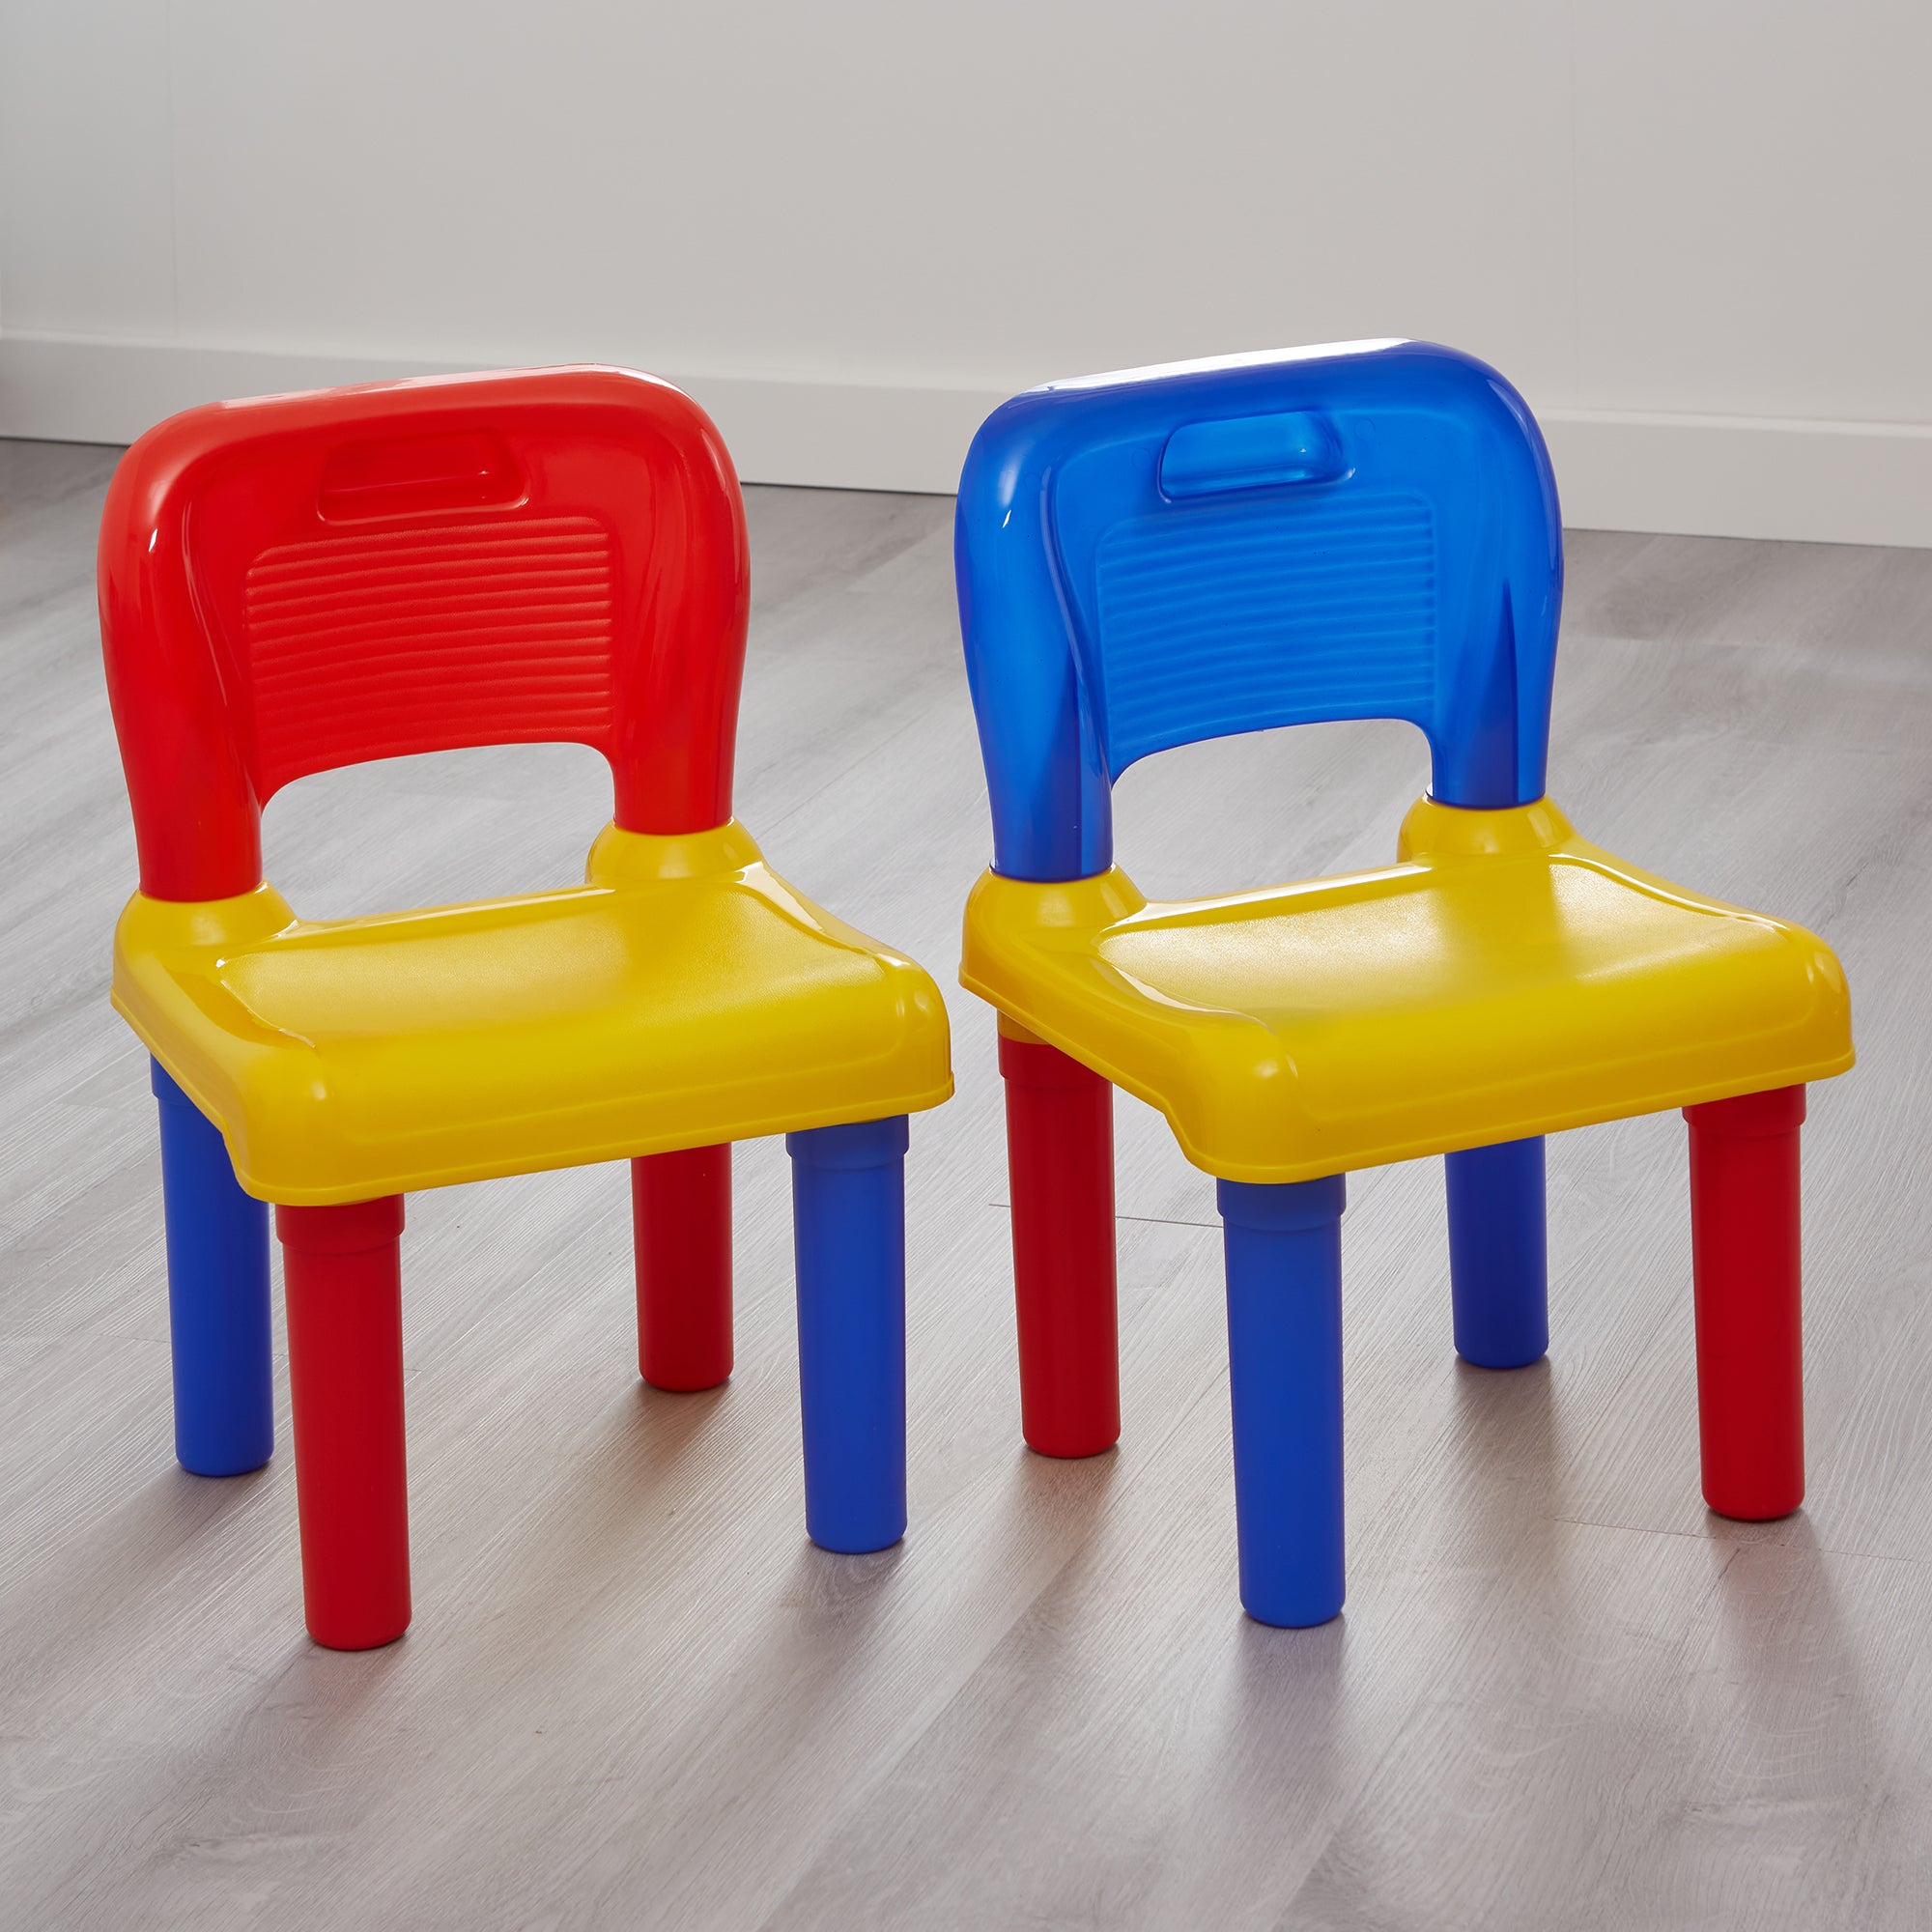 Image of Children's Chairs - 2 Chairs